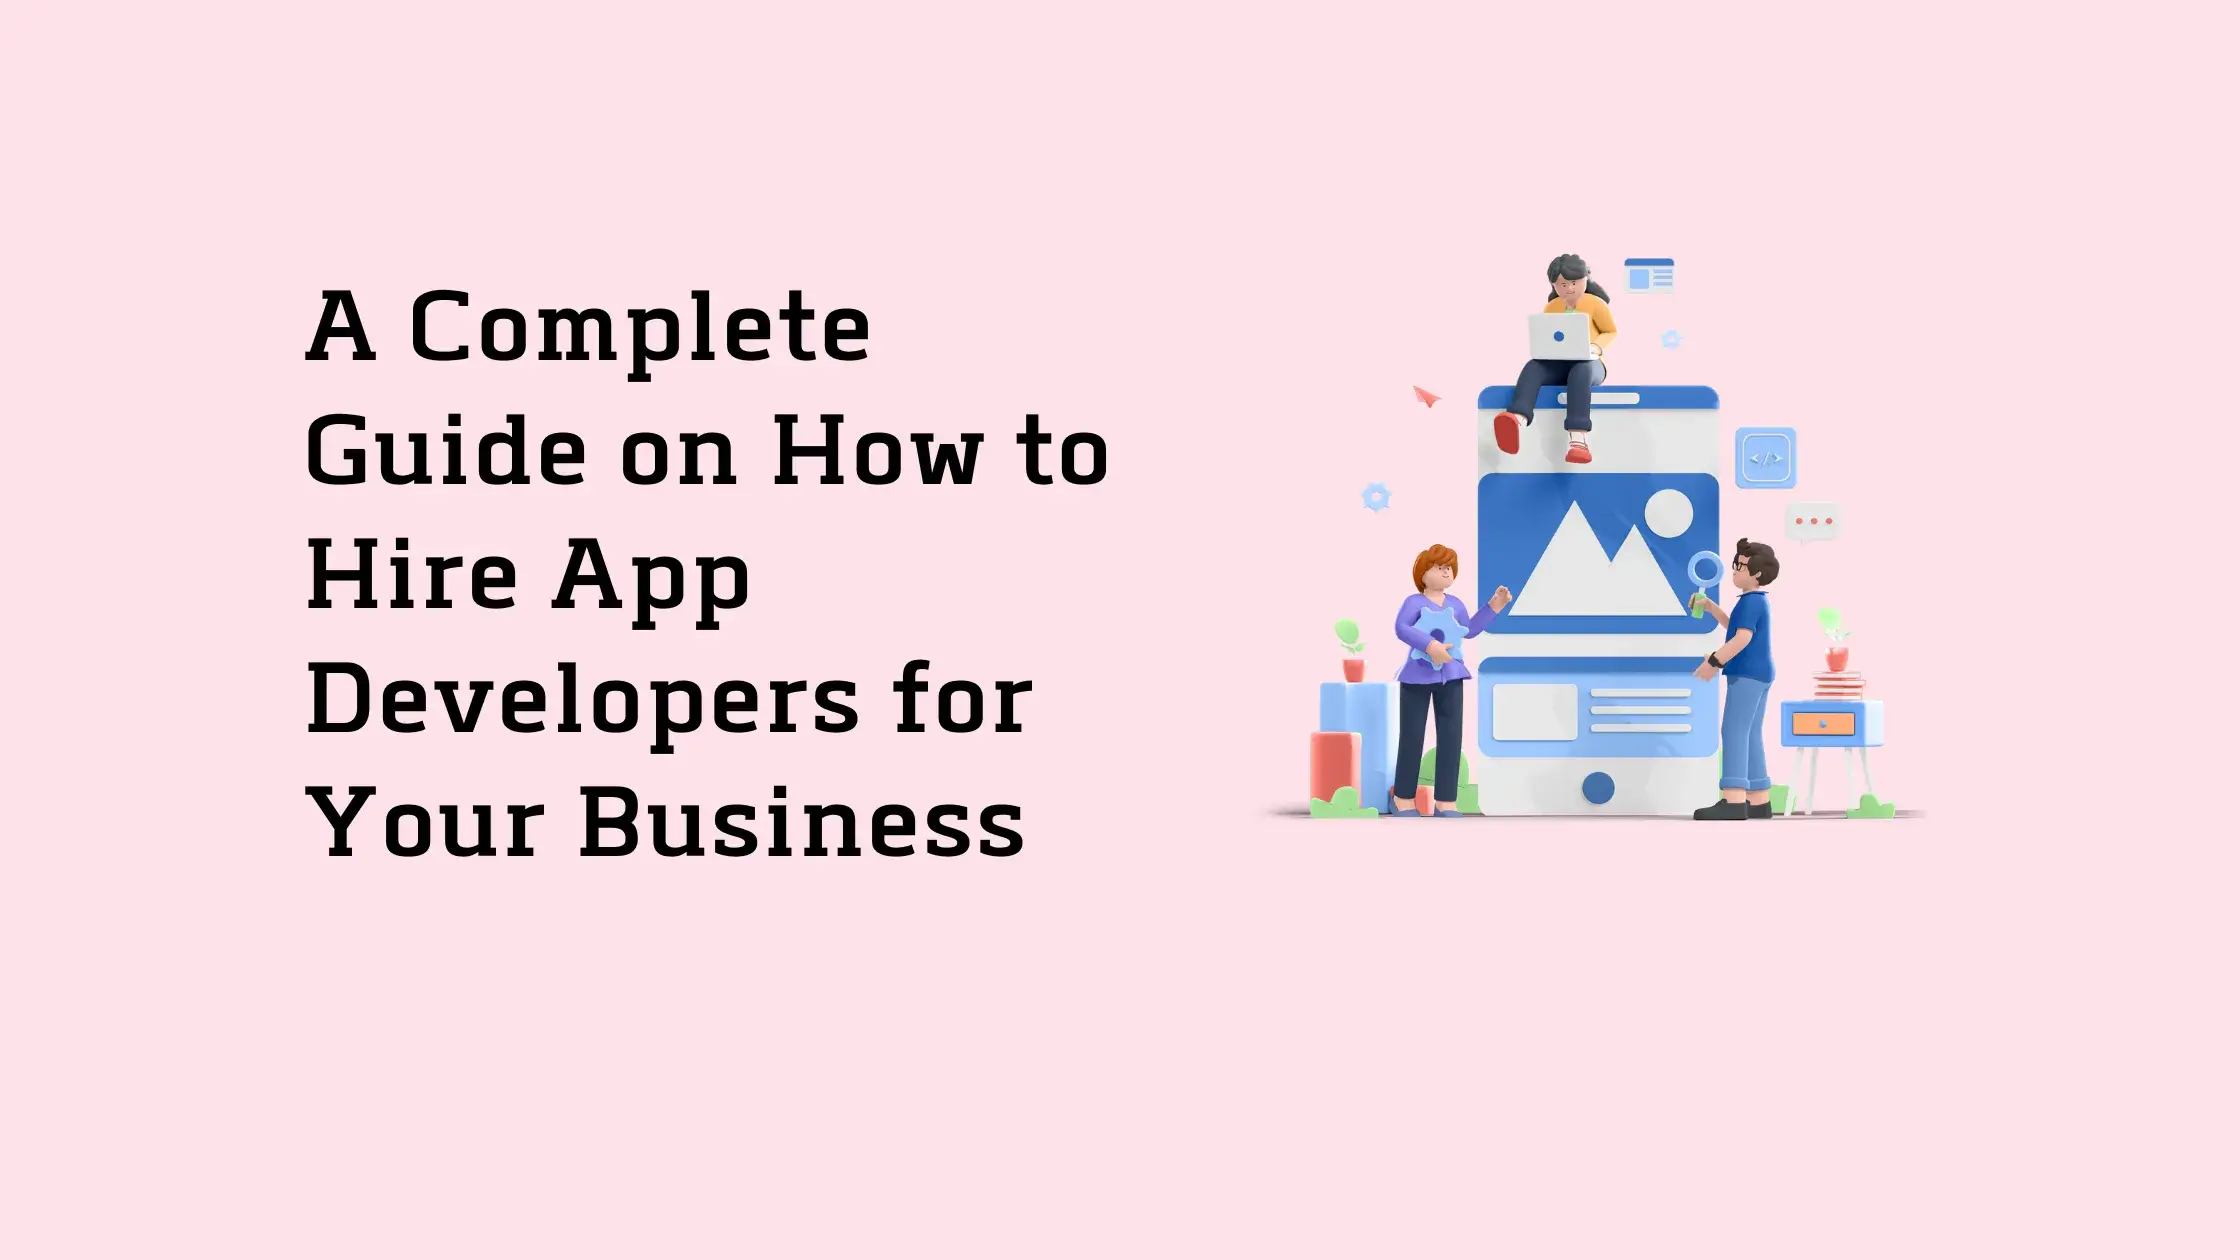 A Complete Guide on How to Hire App Developers for Your Business